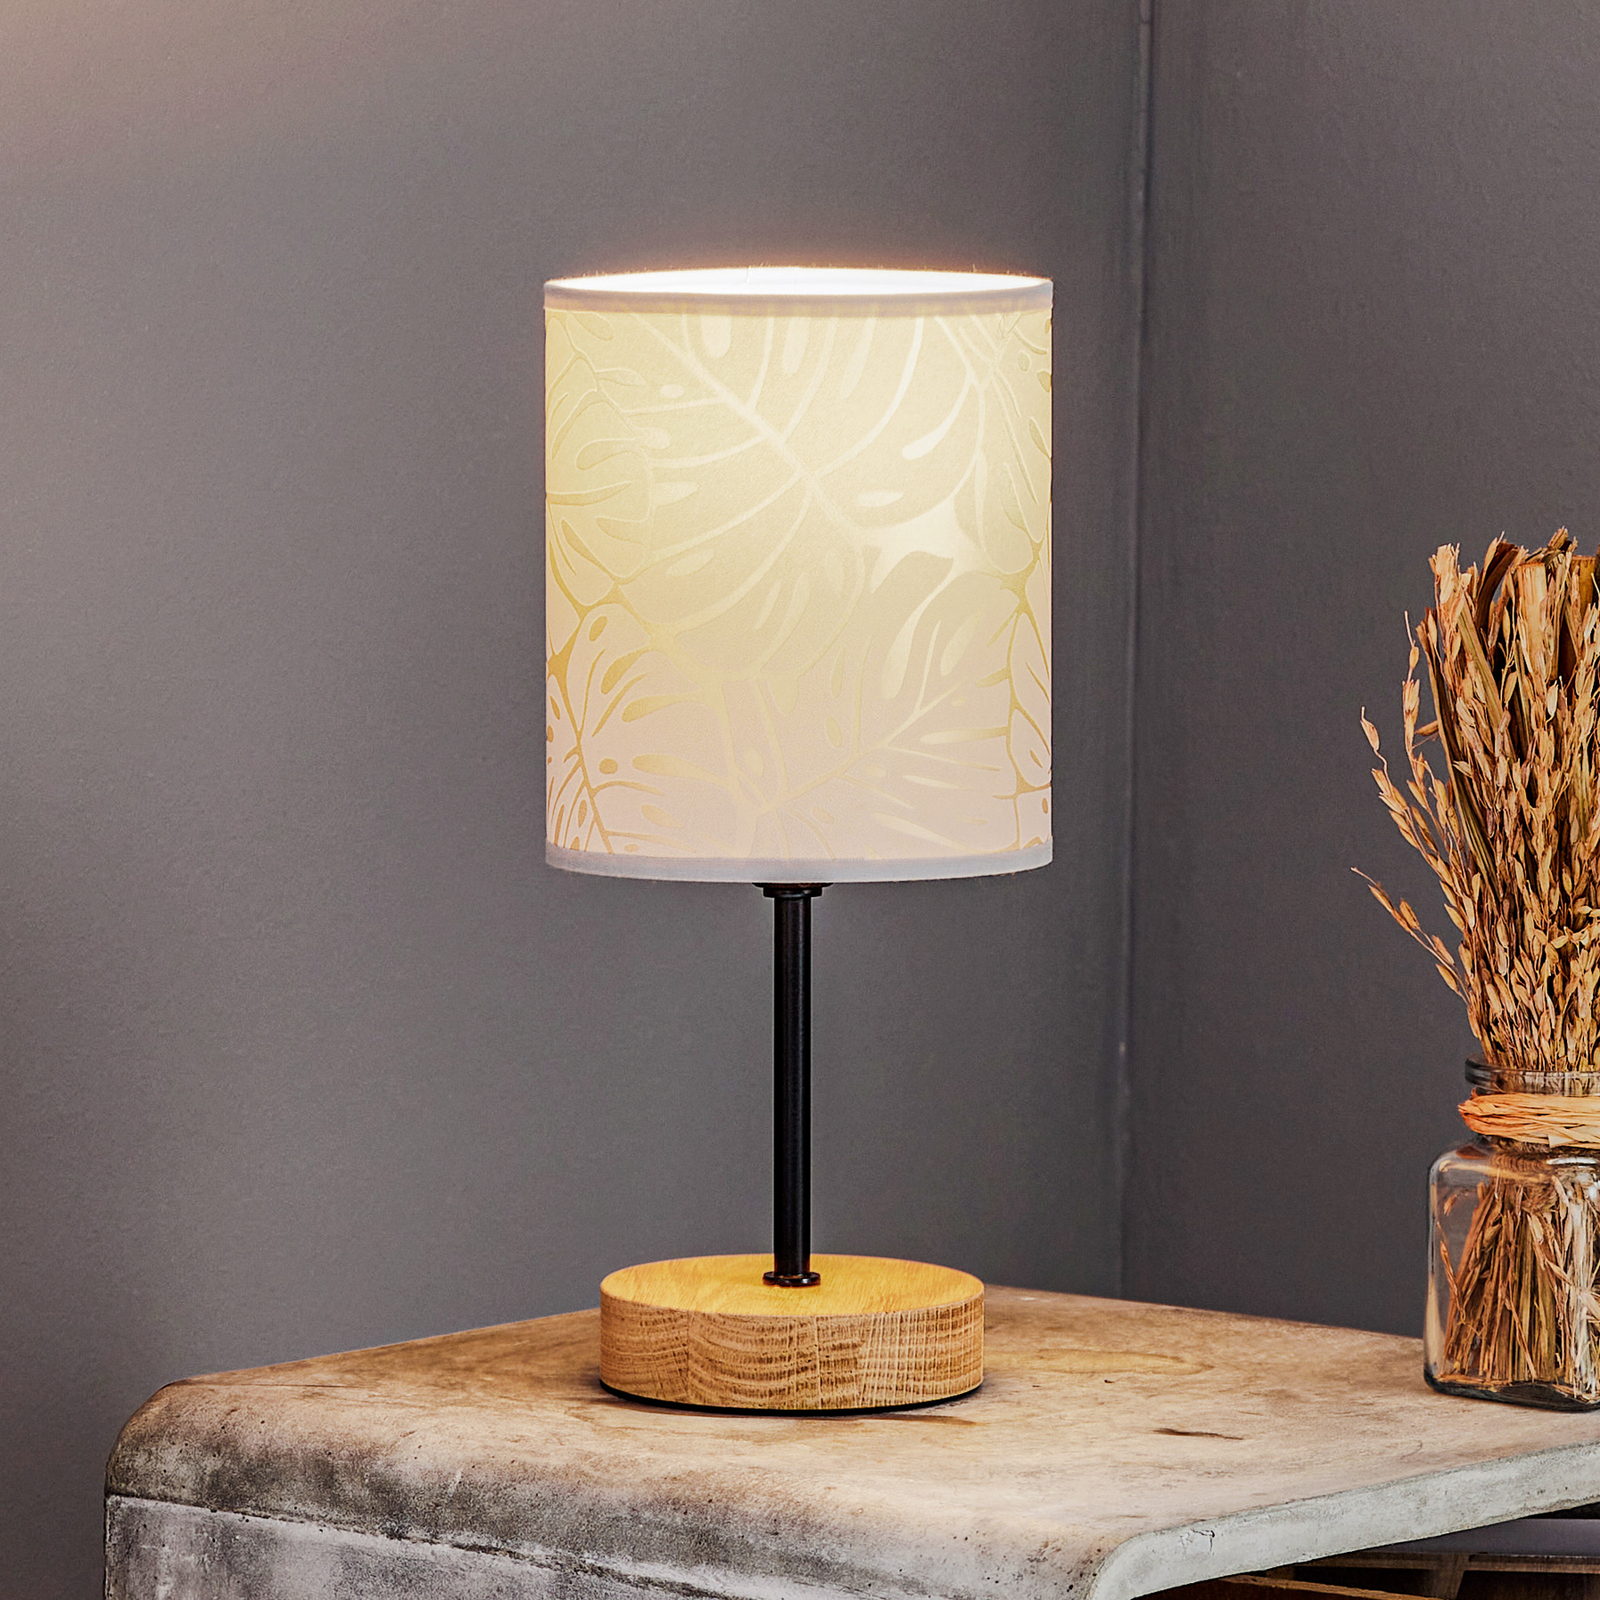 Hierro table lamp with a printed paper lampshade